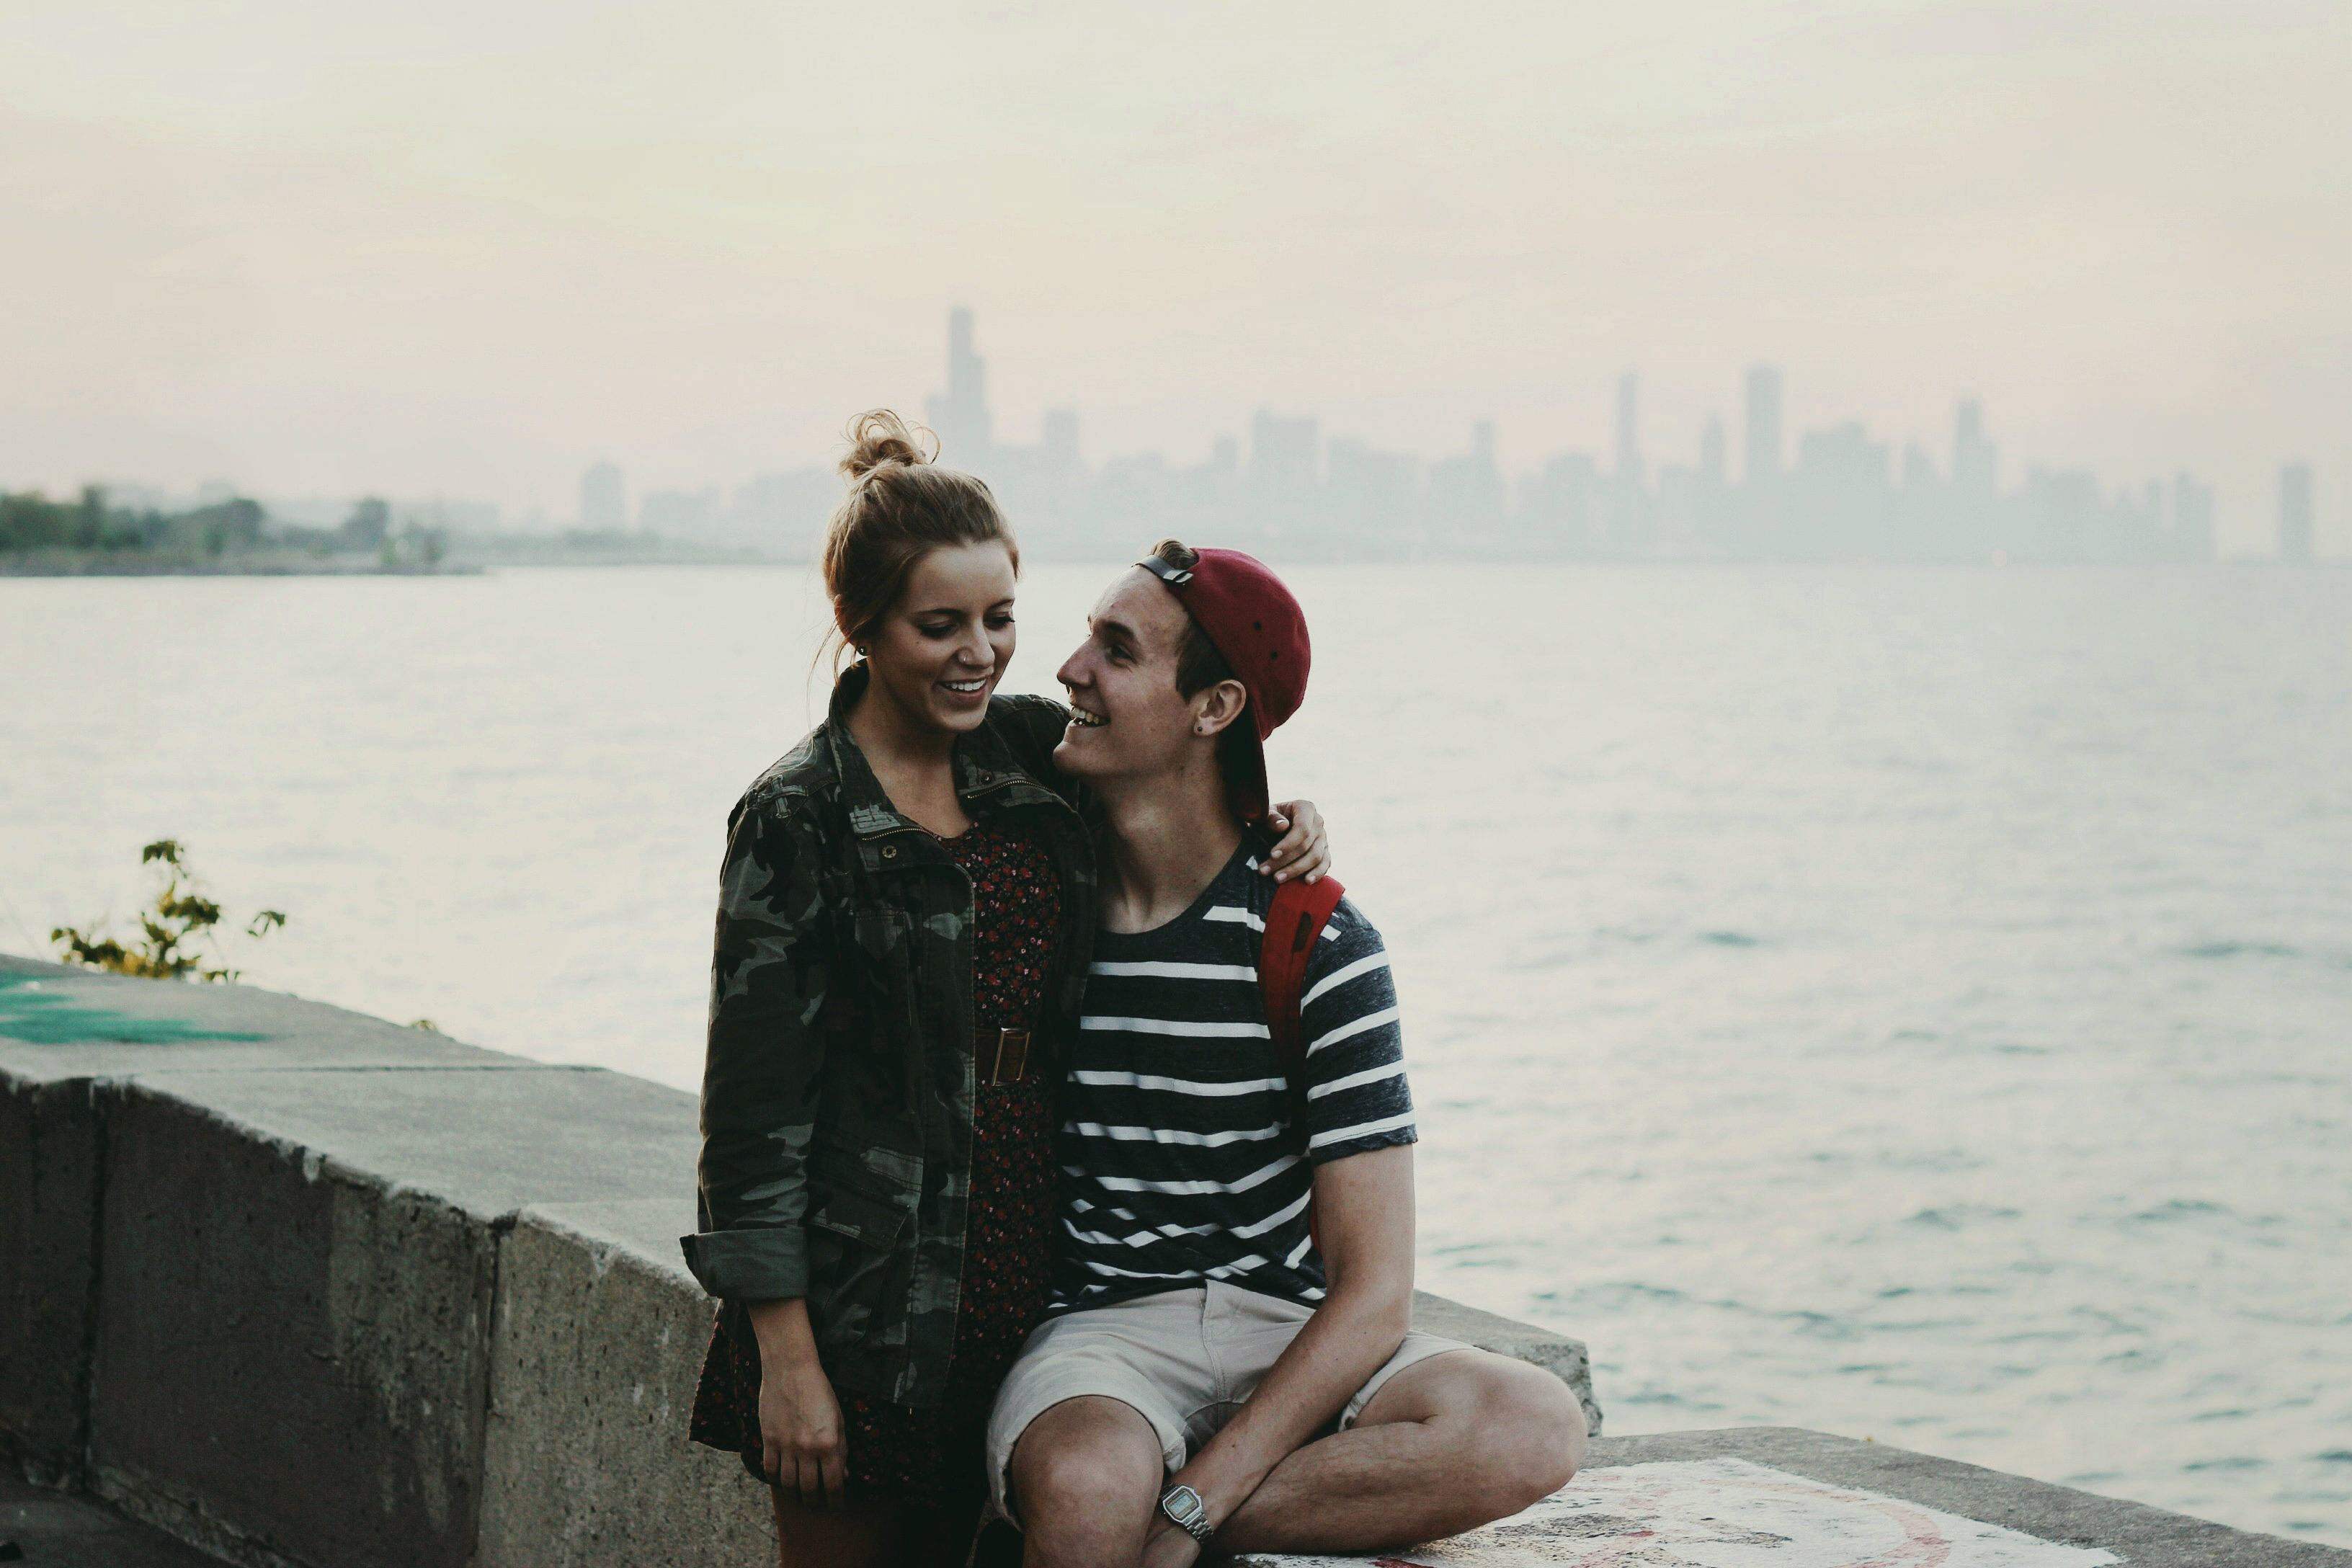 14 Questions You Need to Ask Yourself Before Entering a New Relationship